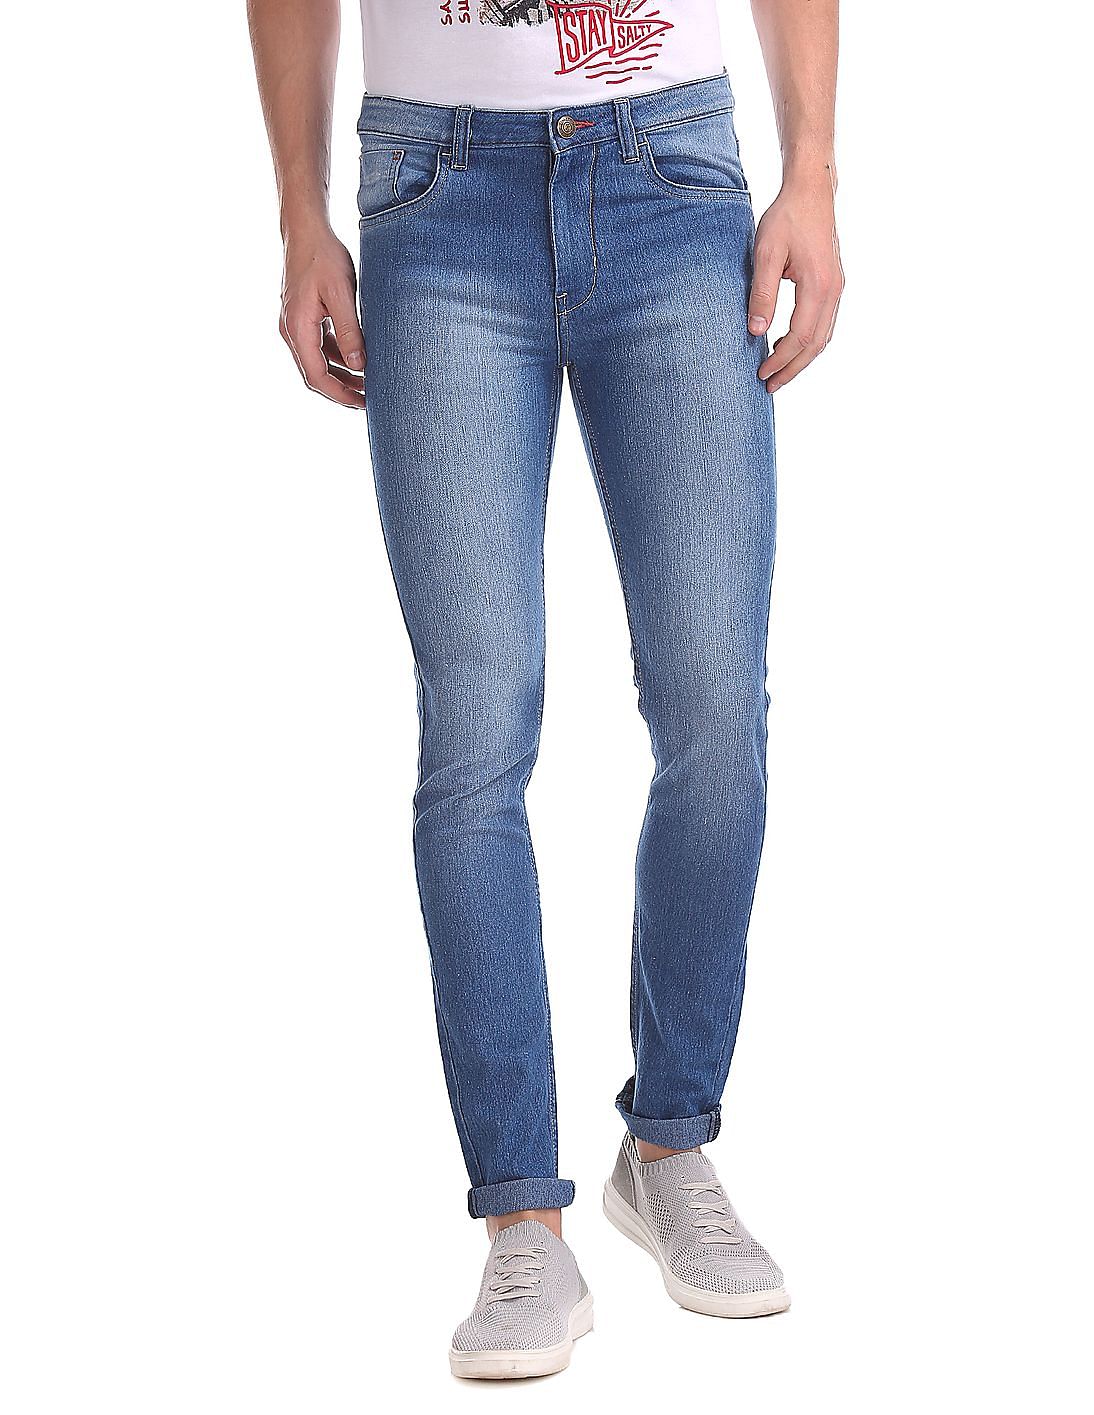 Buy Men Skinny Fit Low Rise Jeans online at NNNOW.com